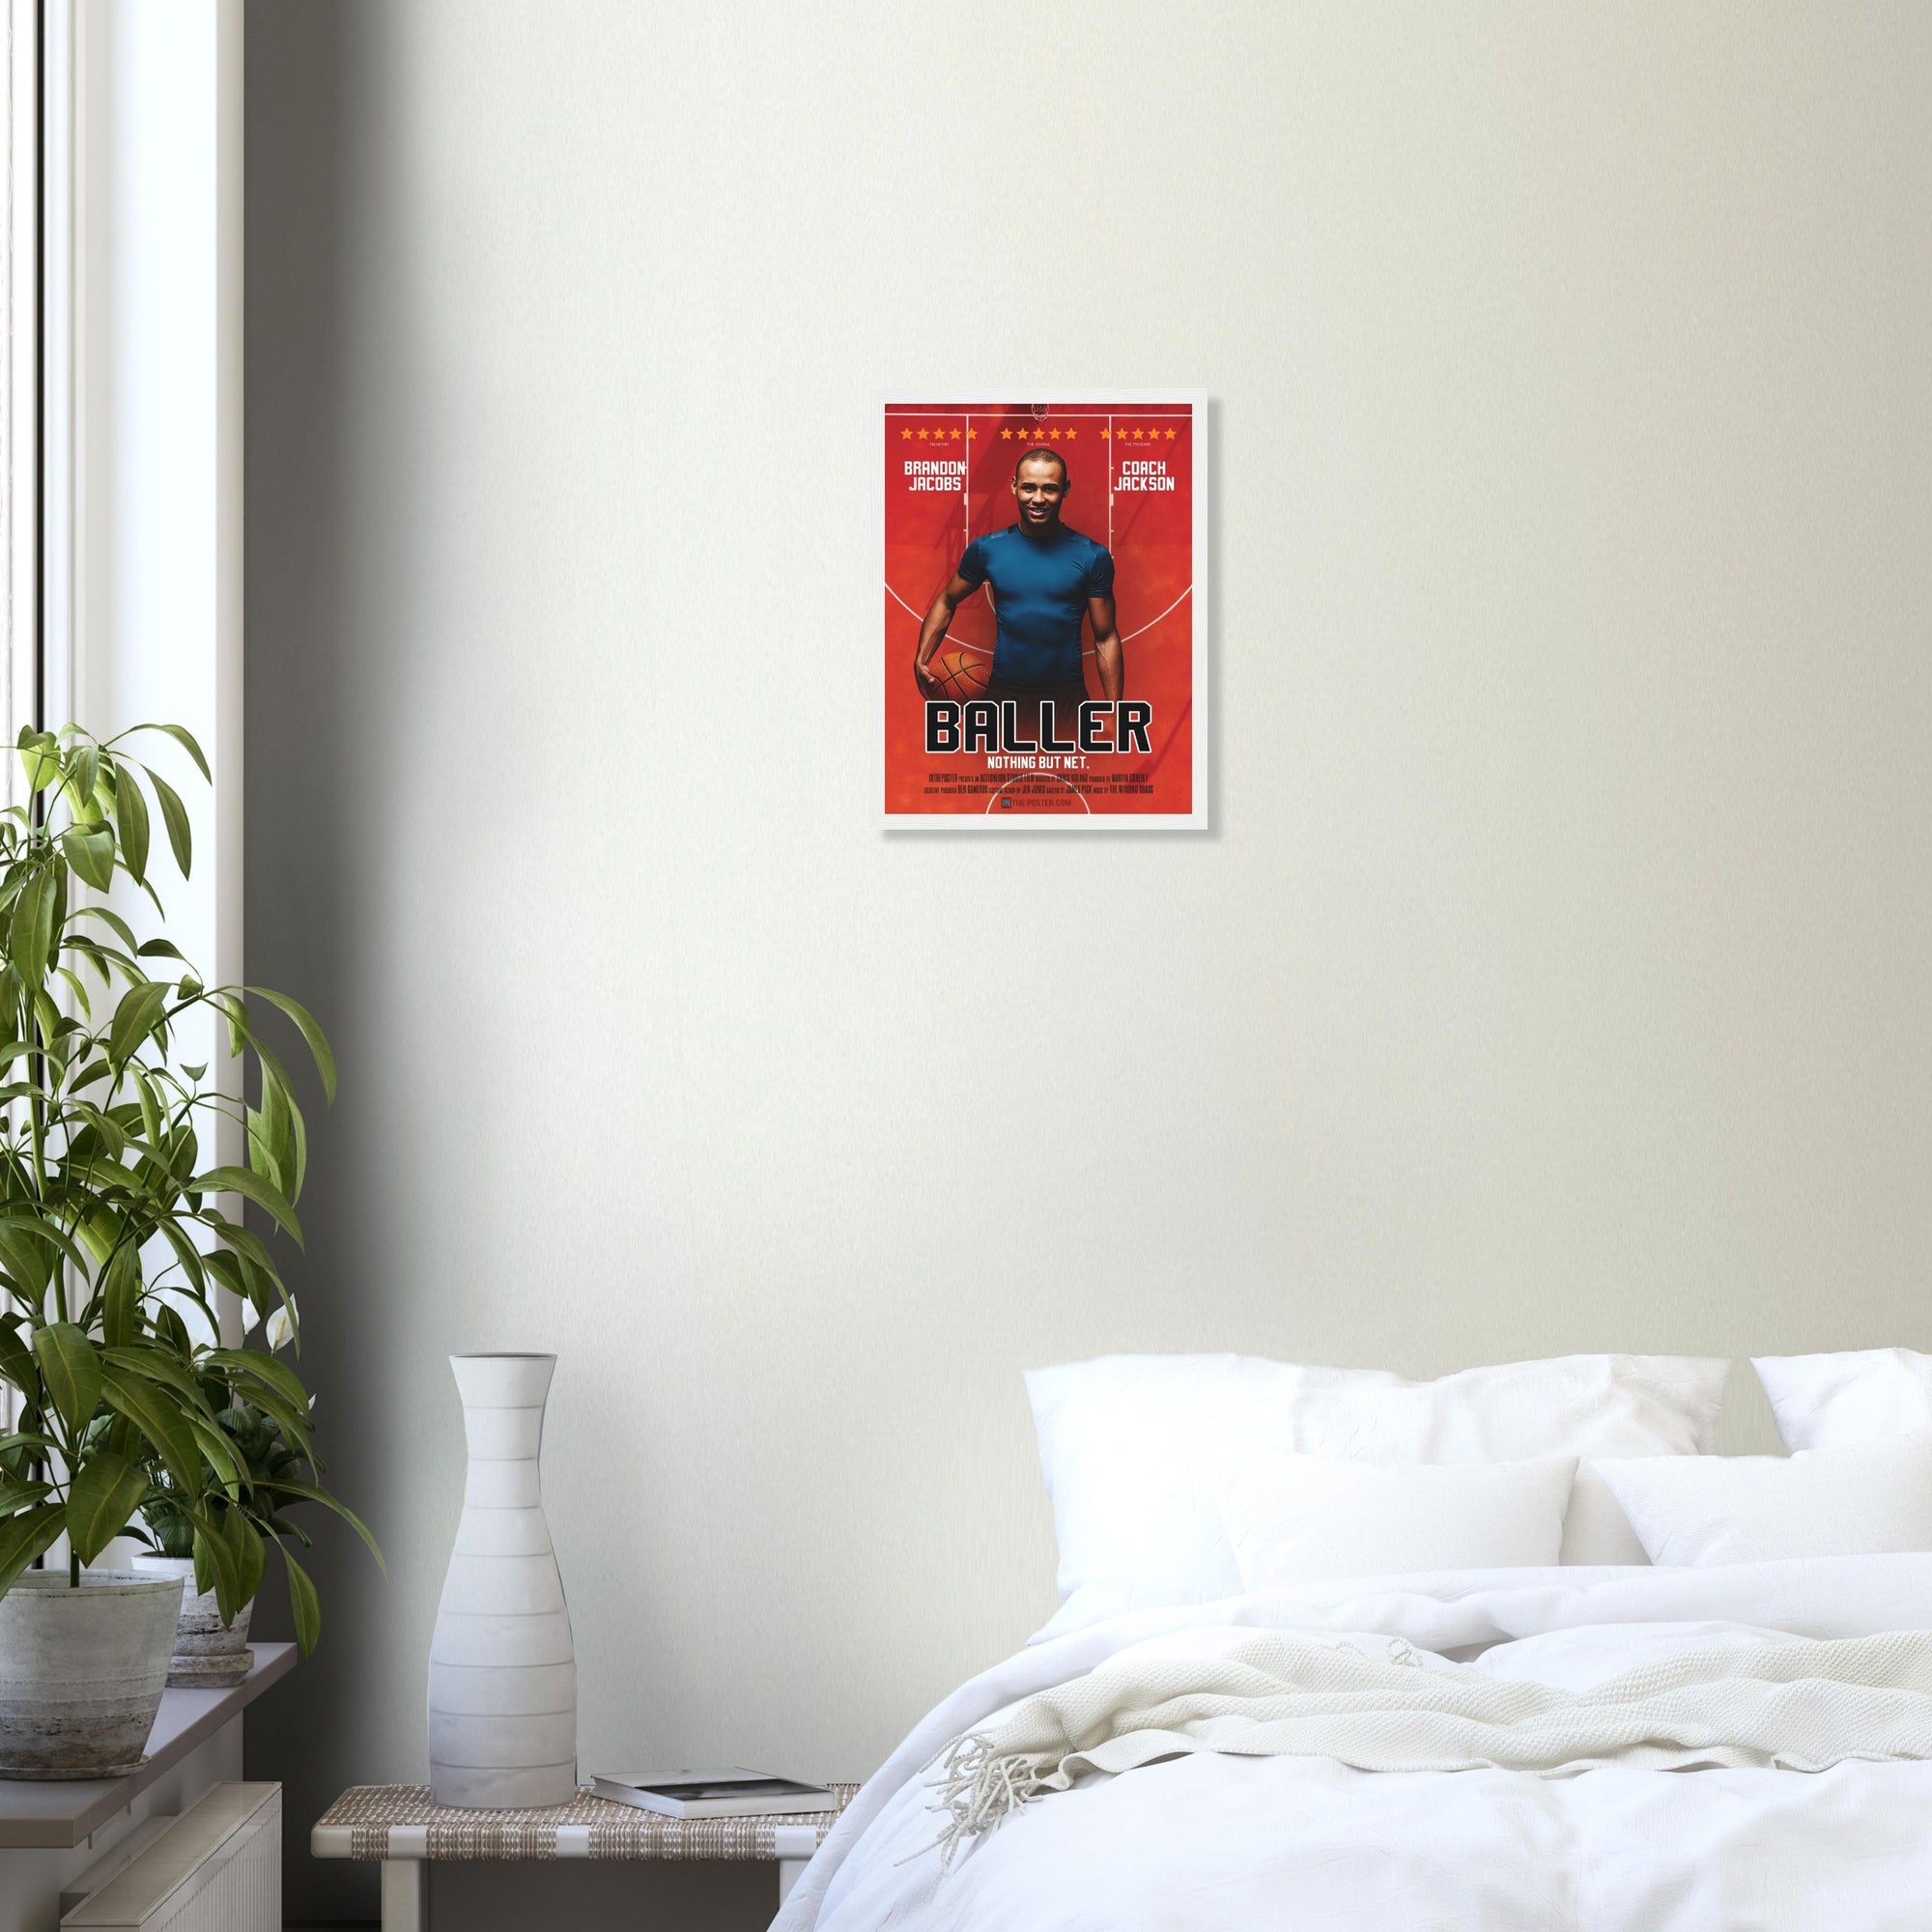 A custom basketball movie poster in a small white frame on a grey wall above a white bed and plant